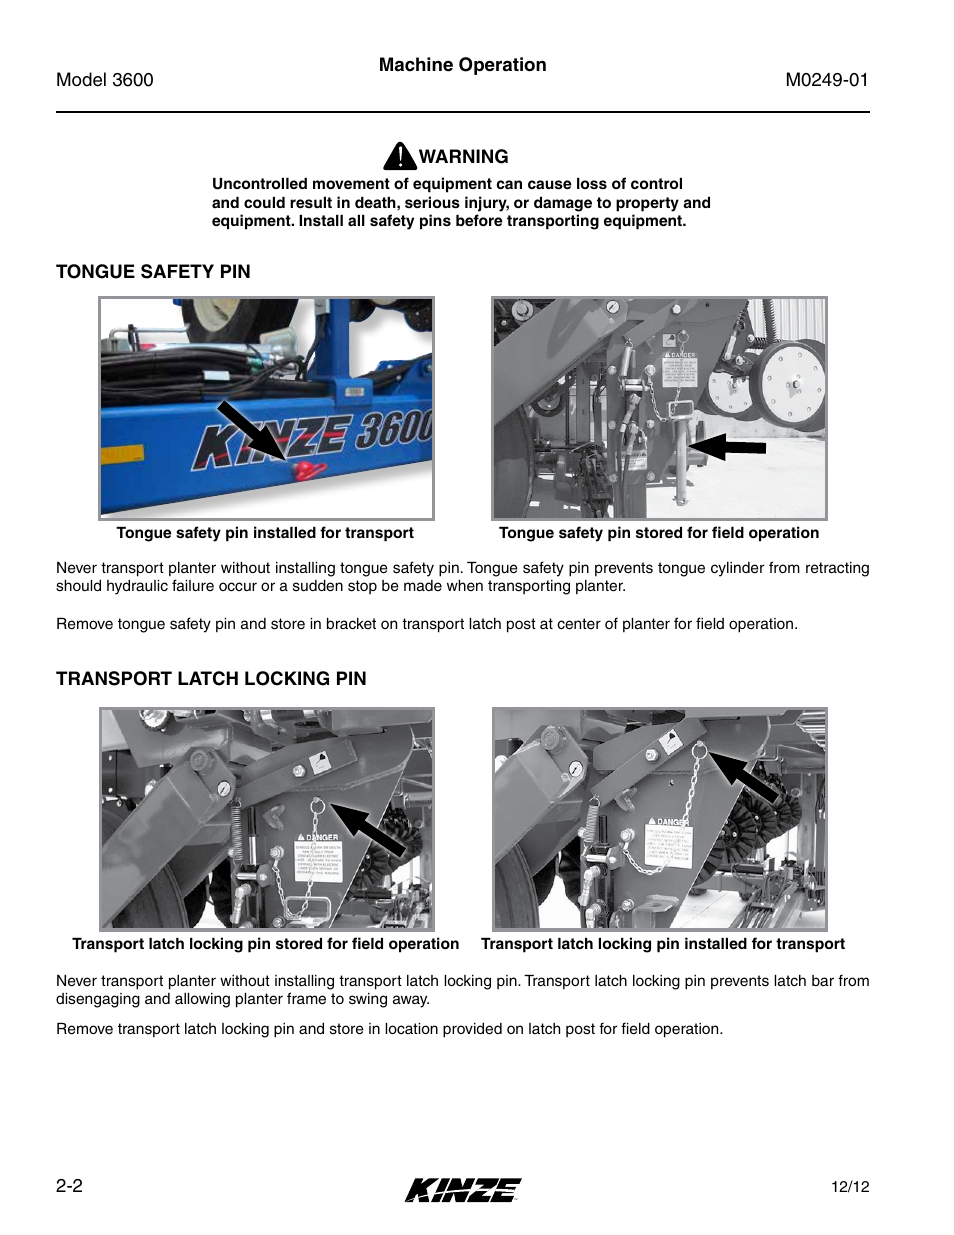 Tongue safety pin, Transport latch locking pin, Tongue safety pin -2 | Transport latch locking pin -2 | Kinze 3600 Lift and Rotate Planter (70 CM) Rev. 5/14 User Manual | Page 14 / 158